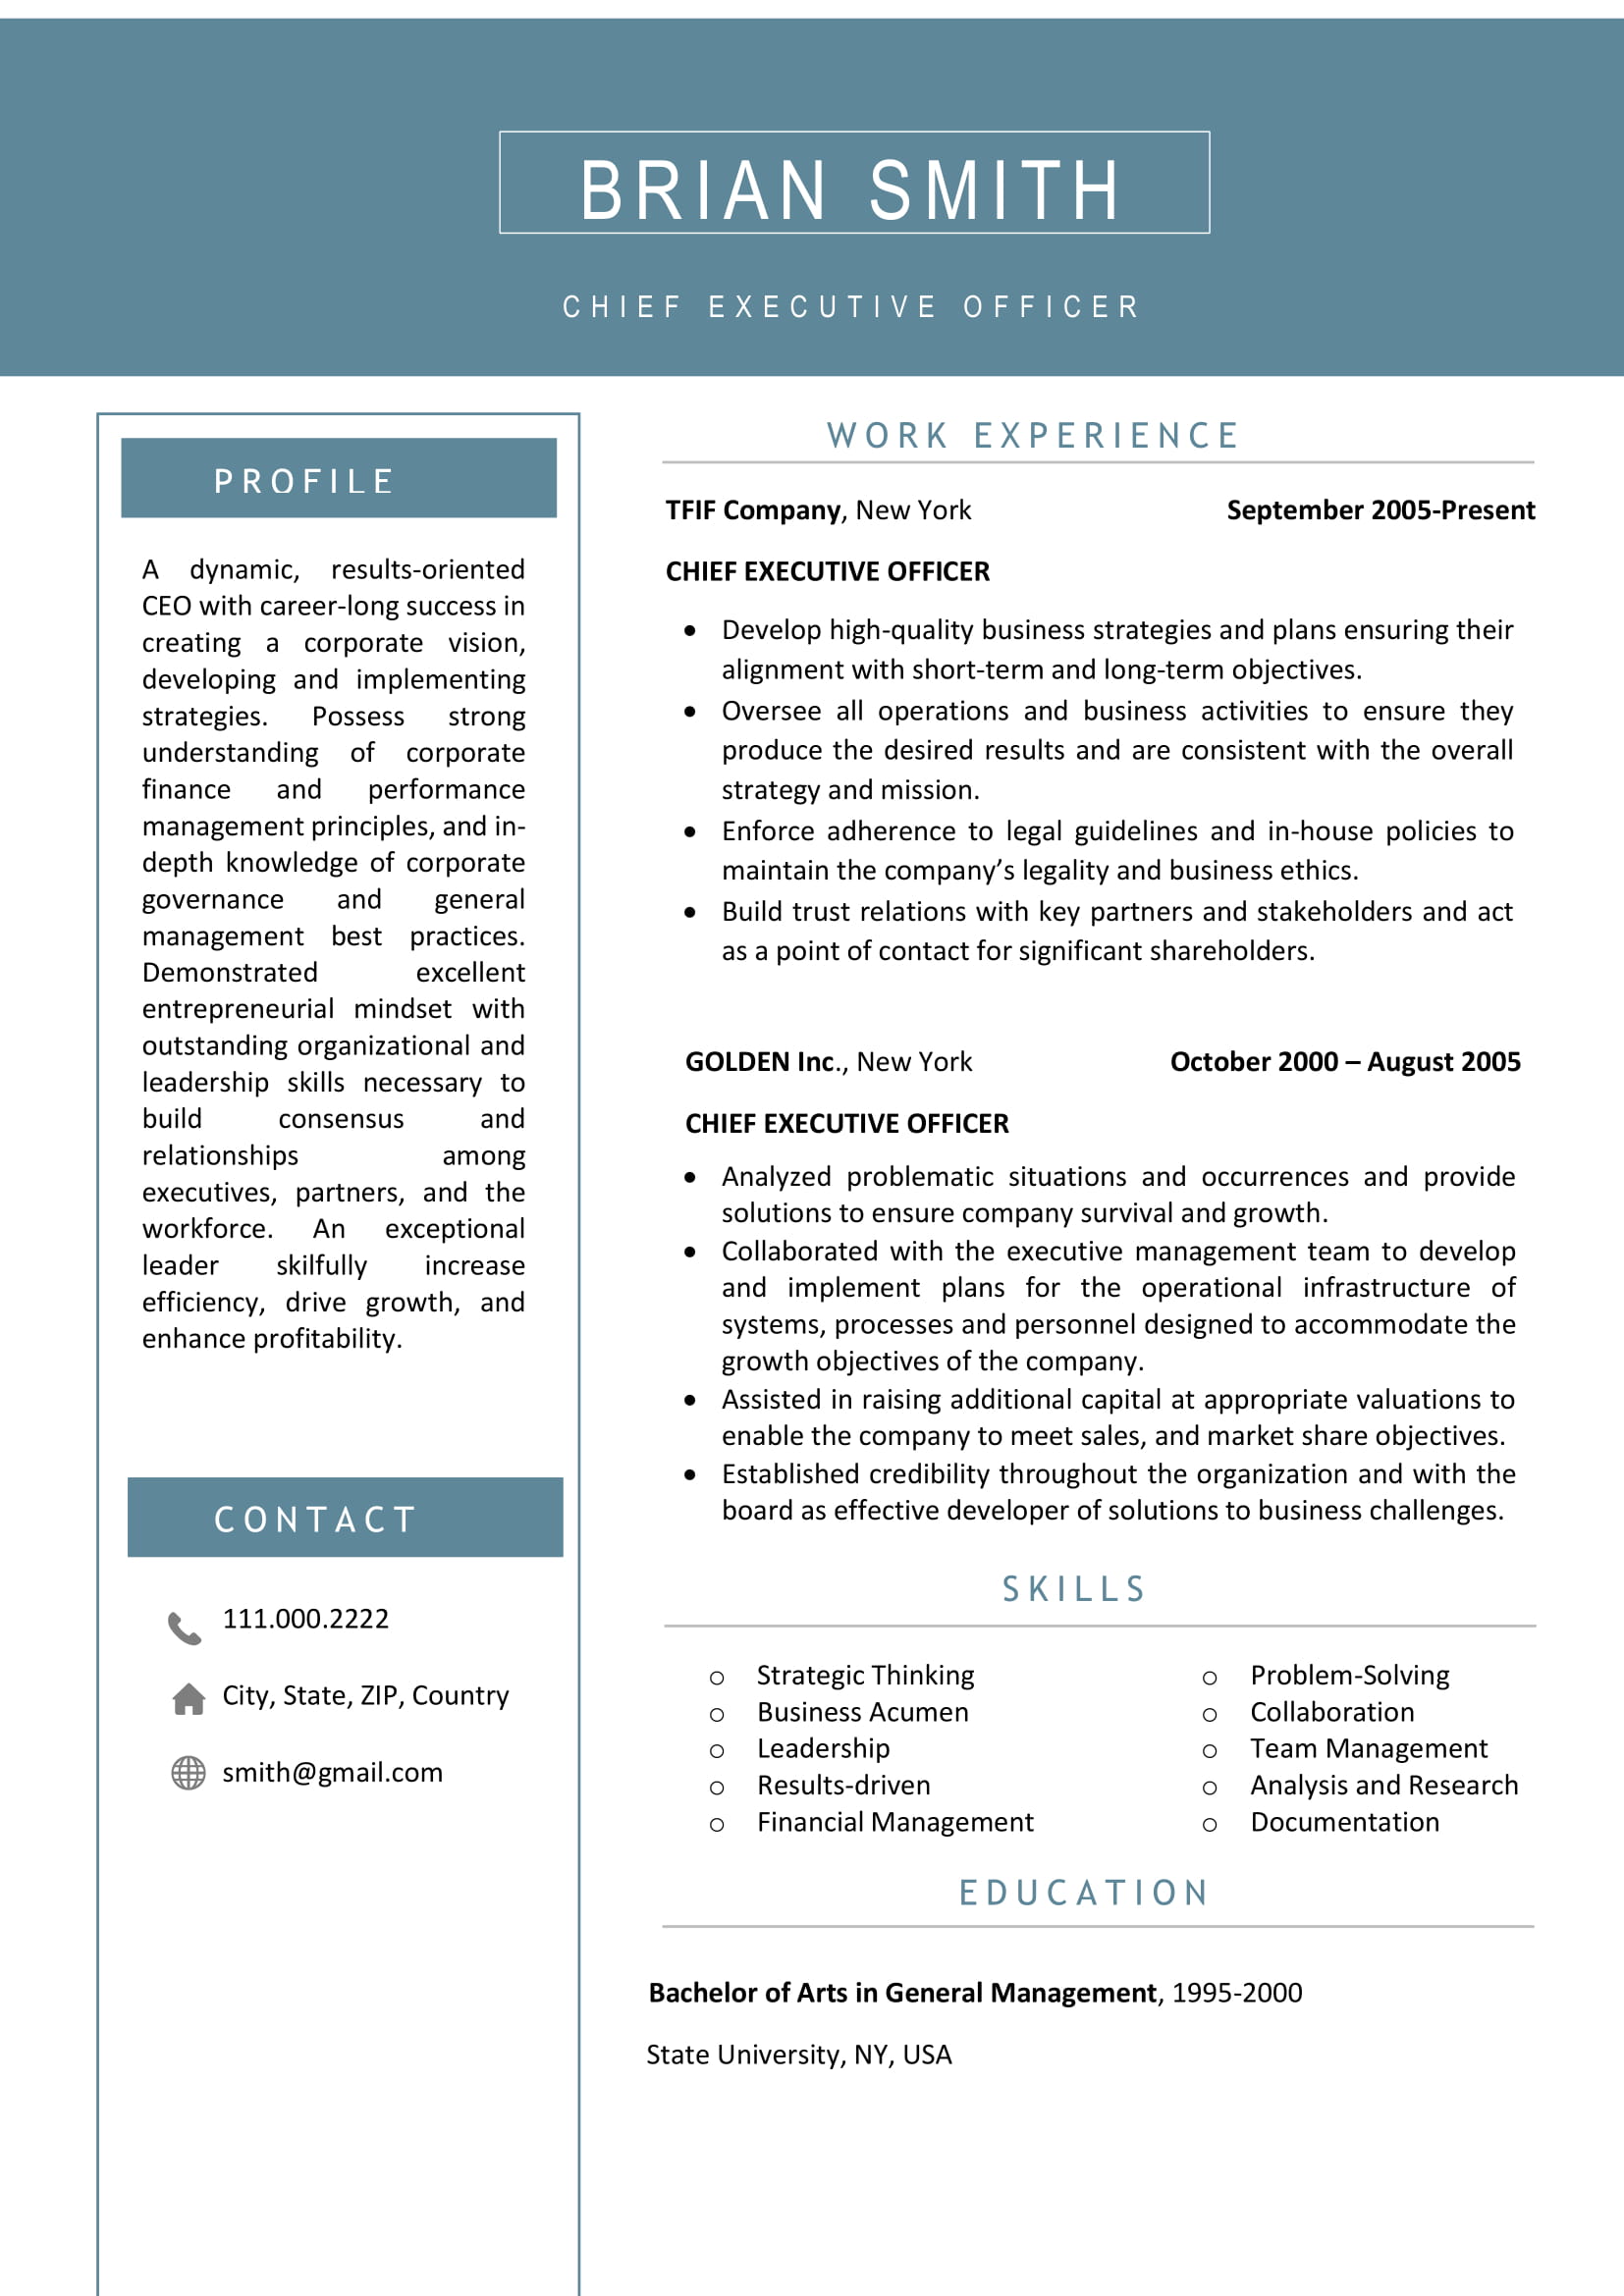 top professional resume writing services